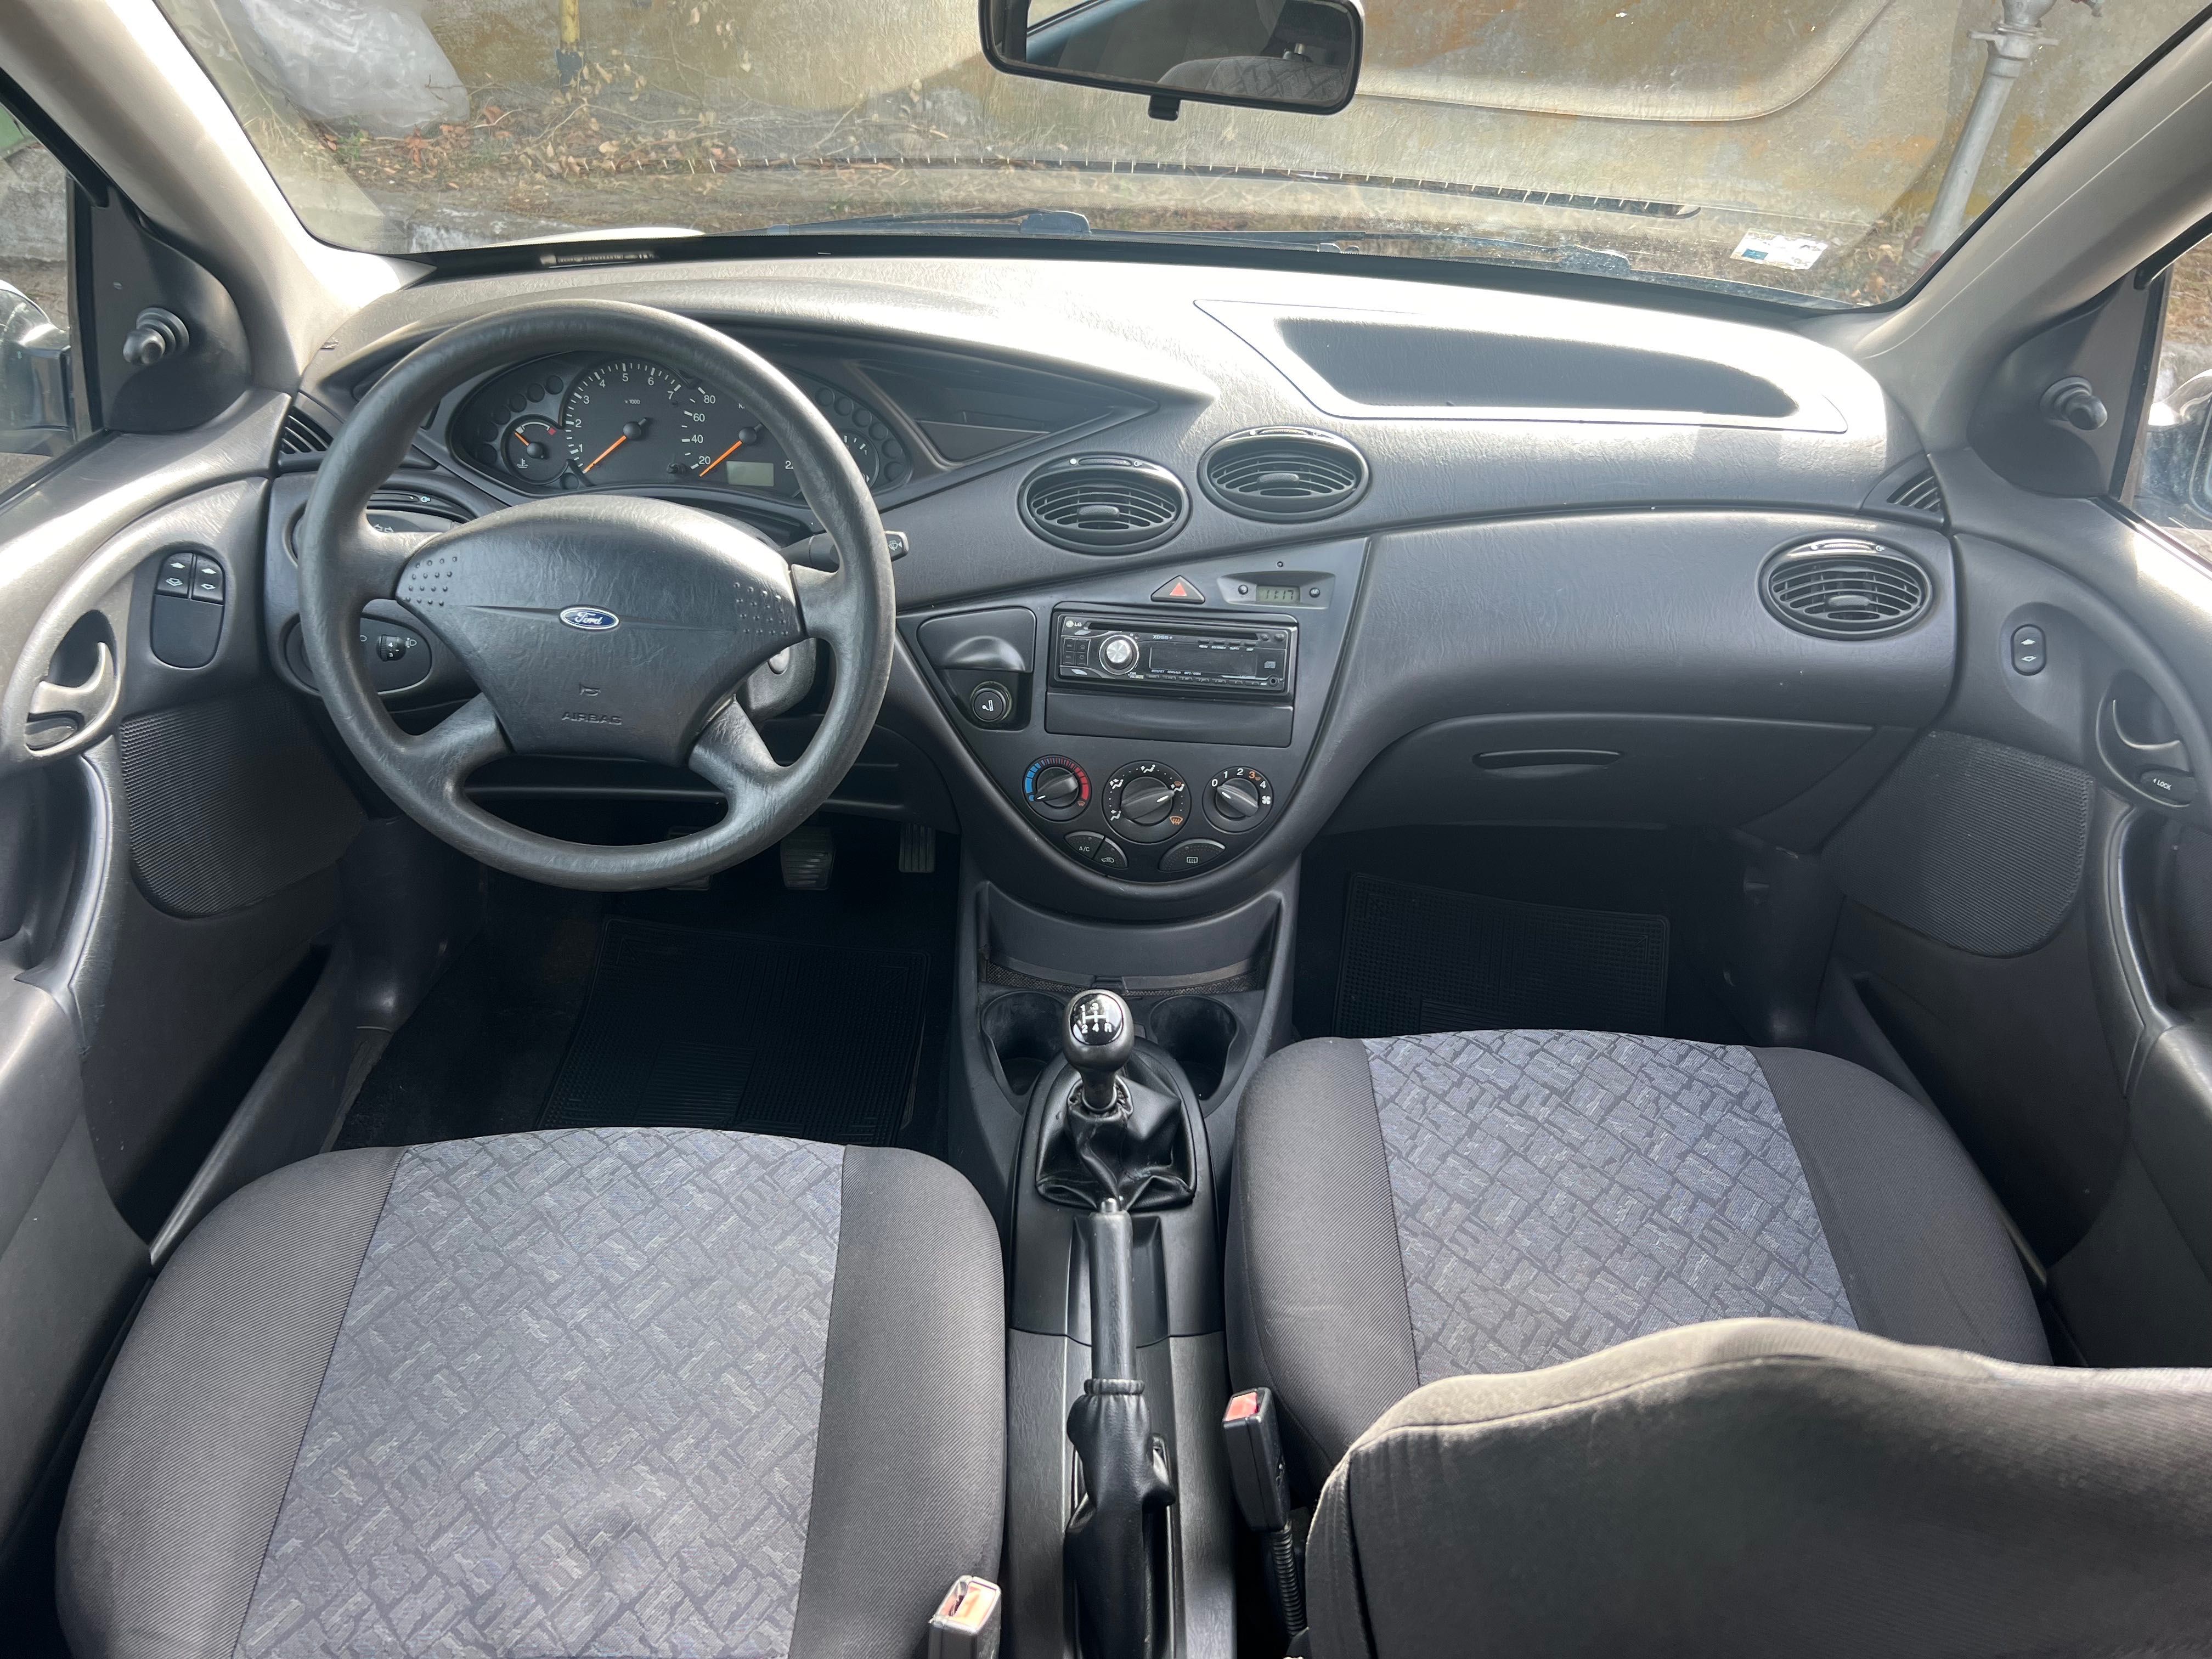 Ford Focus 93.000KM